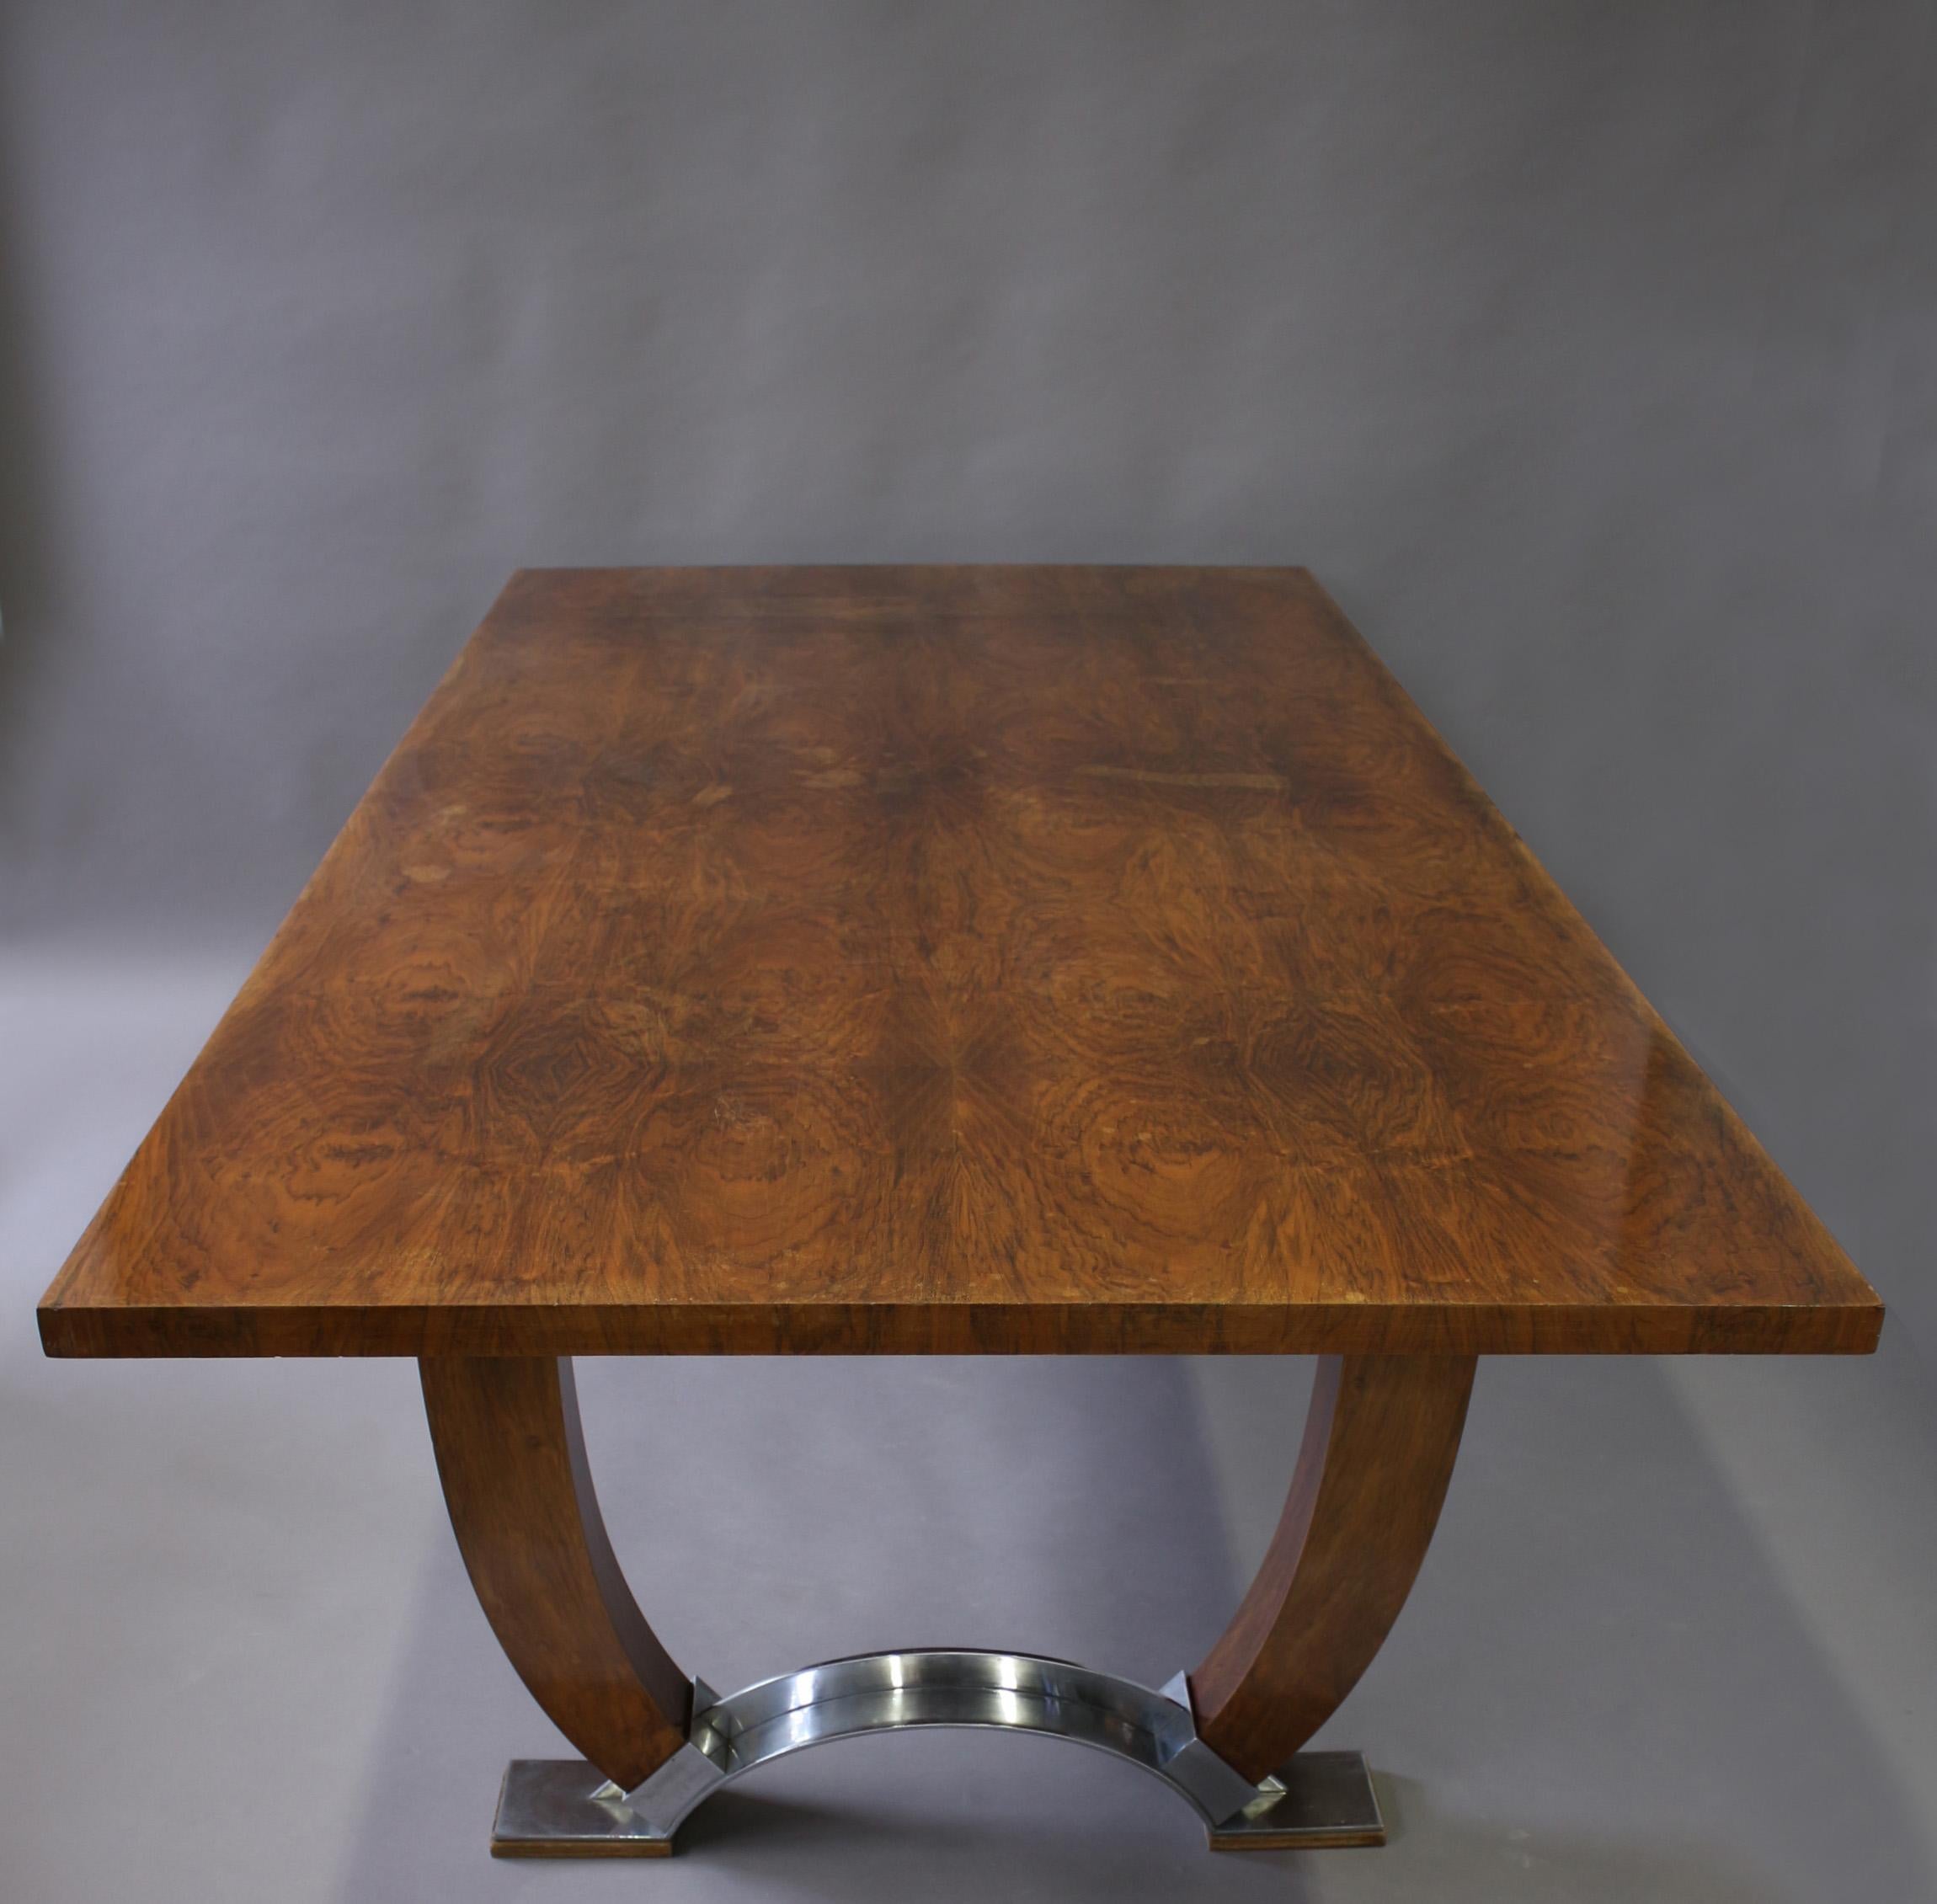 Large Fine French Art Deco Extendable Walnut Dining Table by Leleu - Documented (Chrom)